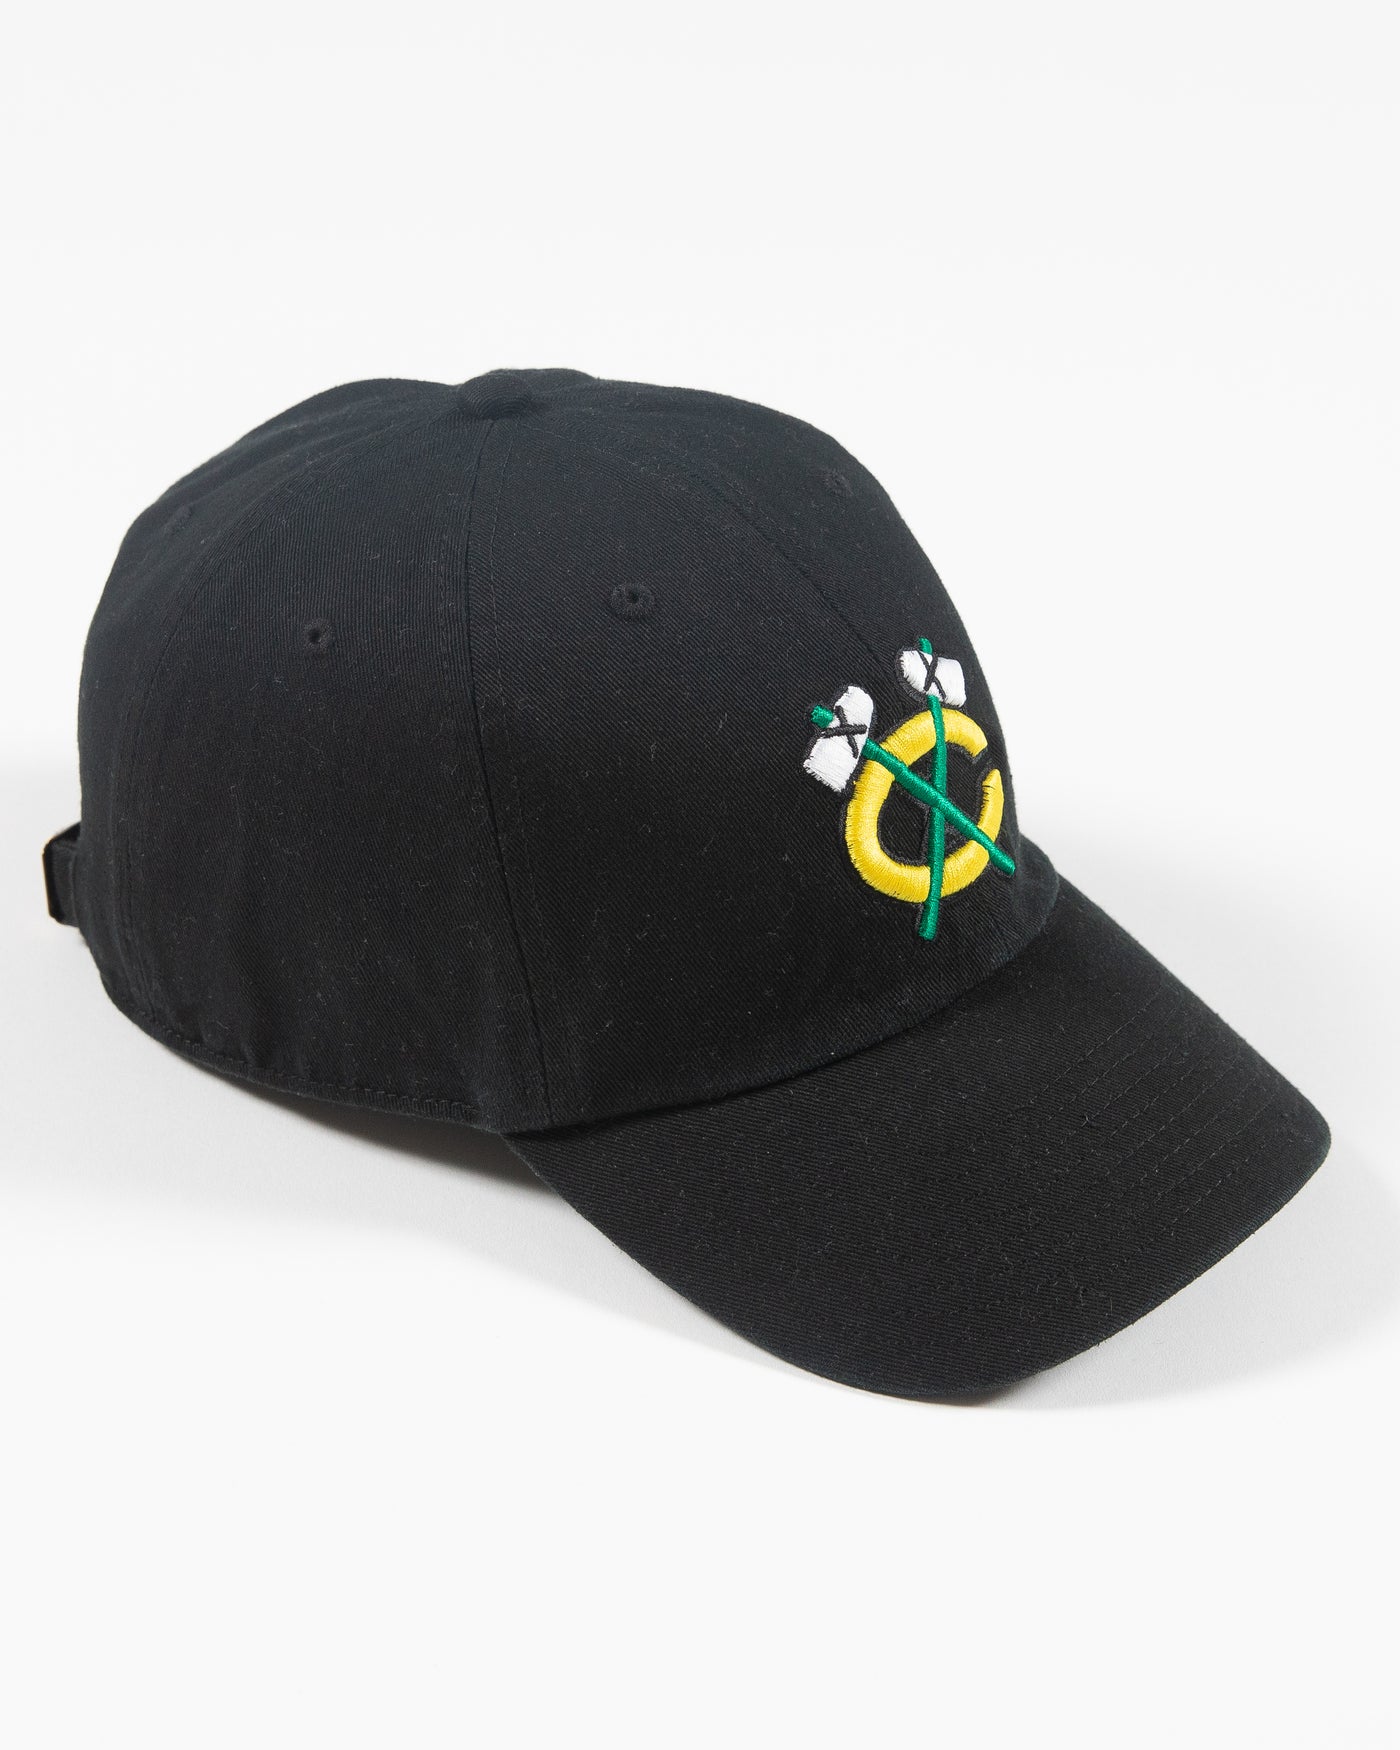 '47 brand black cap with Chicago Blackhawks secondary logo embroidered on front - right side lay flat